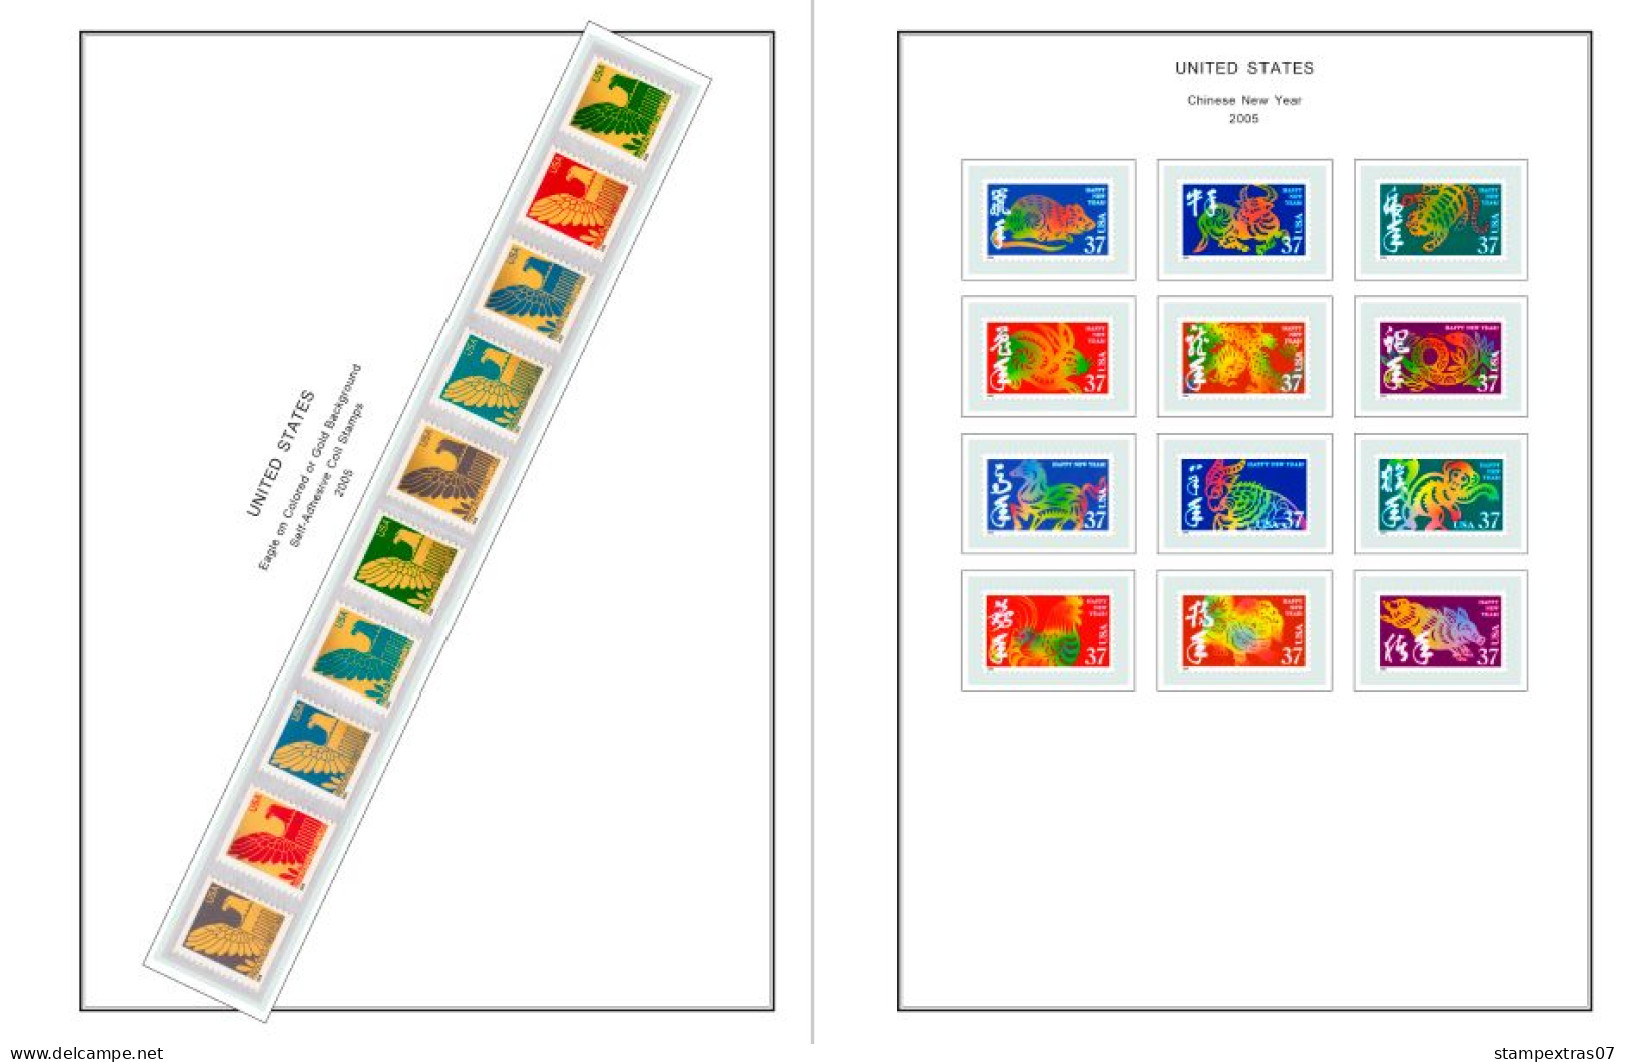 COLOR PRINTED USA 2005-2010 STAMP ALBUM PAGES (90 Illustrated Pages) >> FEUILLES ALBUM - Pre-printed Pages